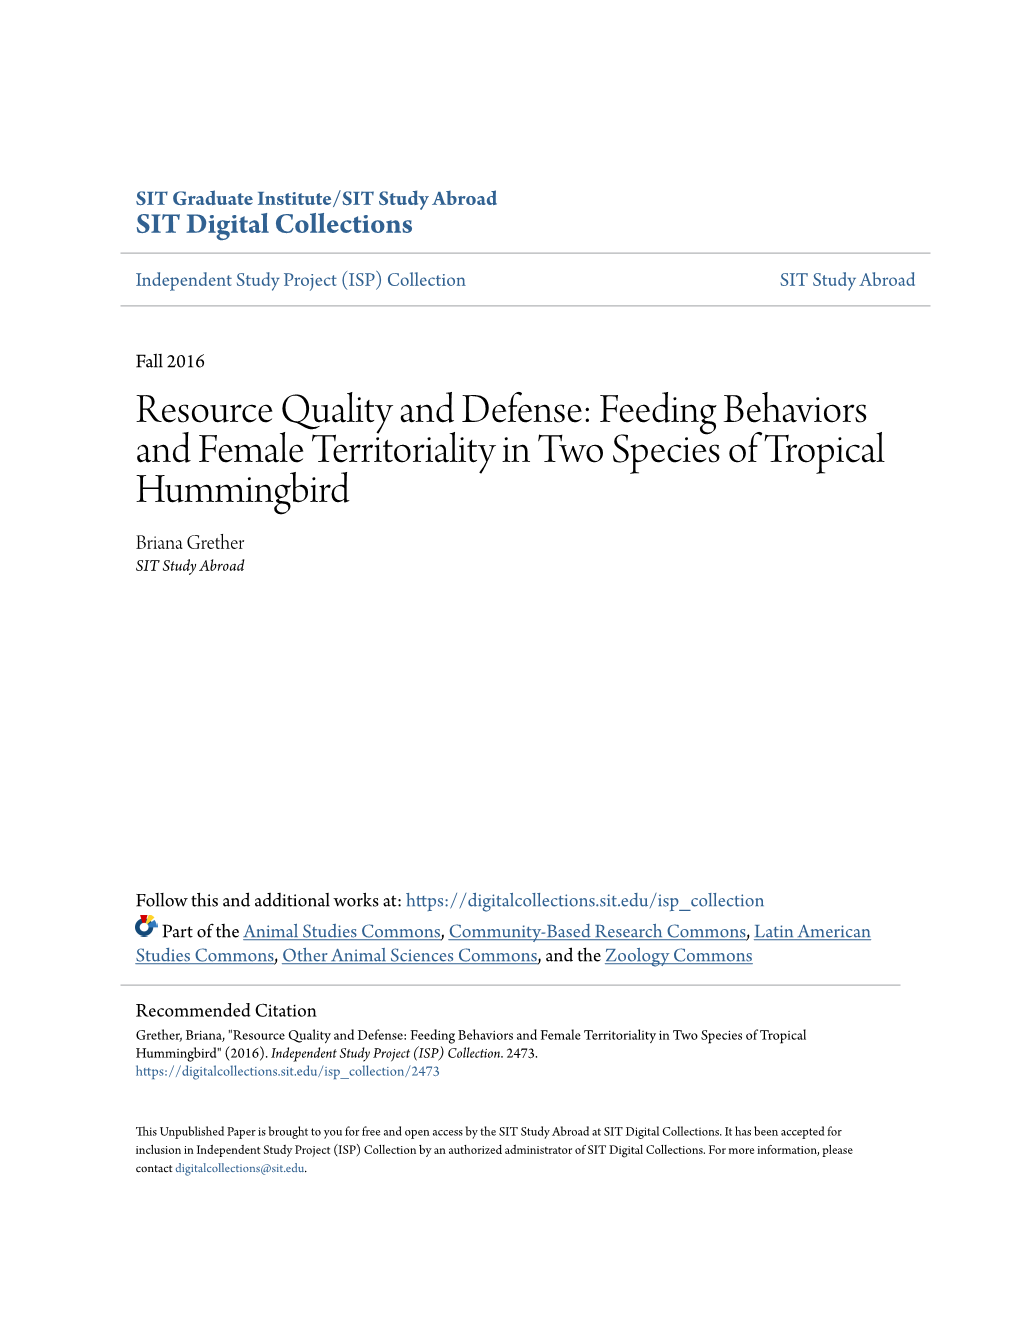 Feeding Behaviors and Female Territoriality in Two Species of Tropical Hummingbird Briana Grether SIT Study Abroad